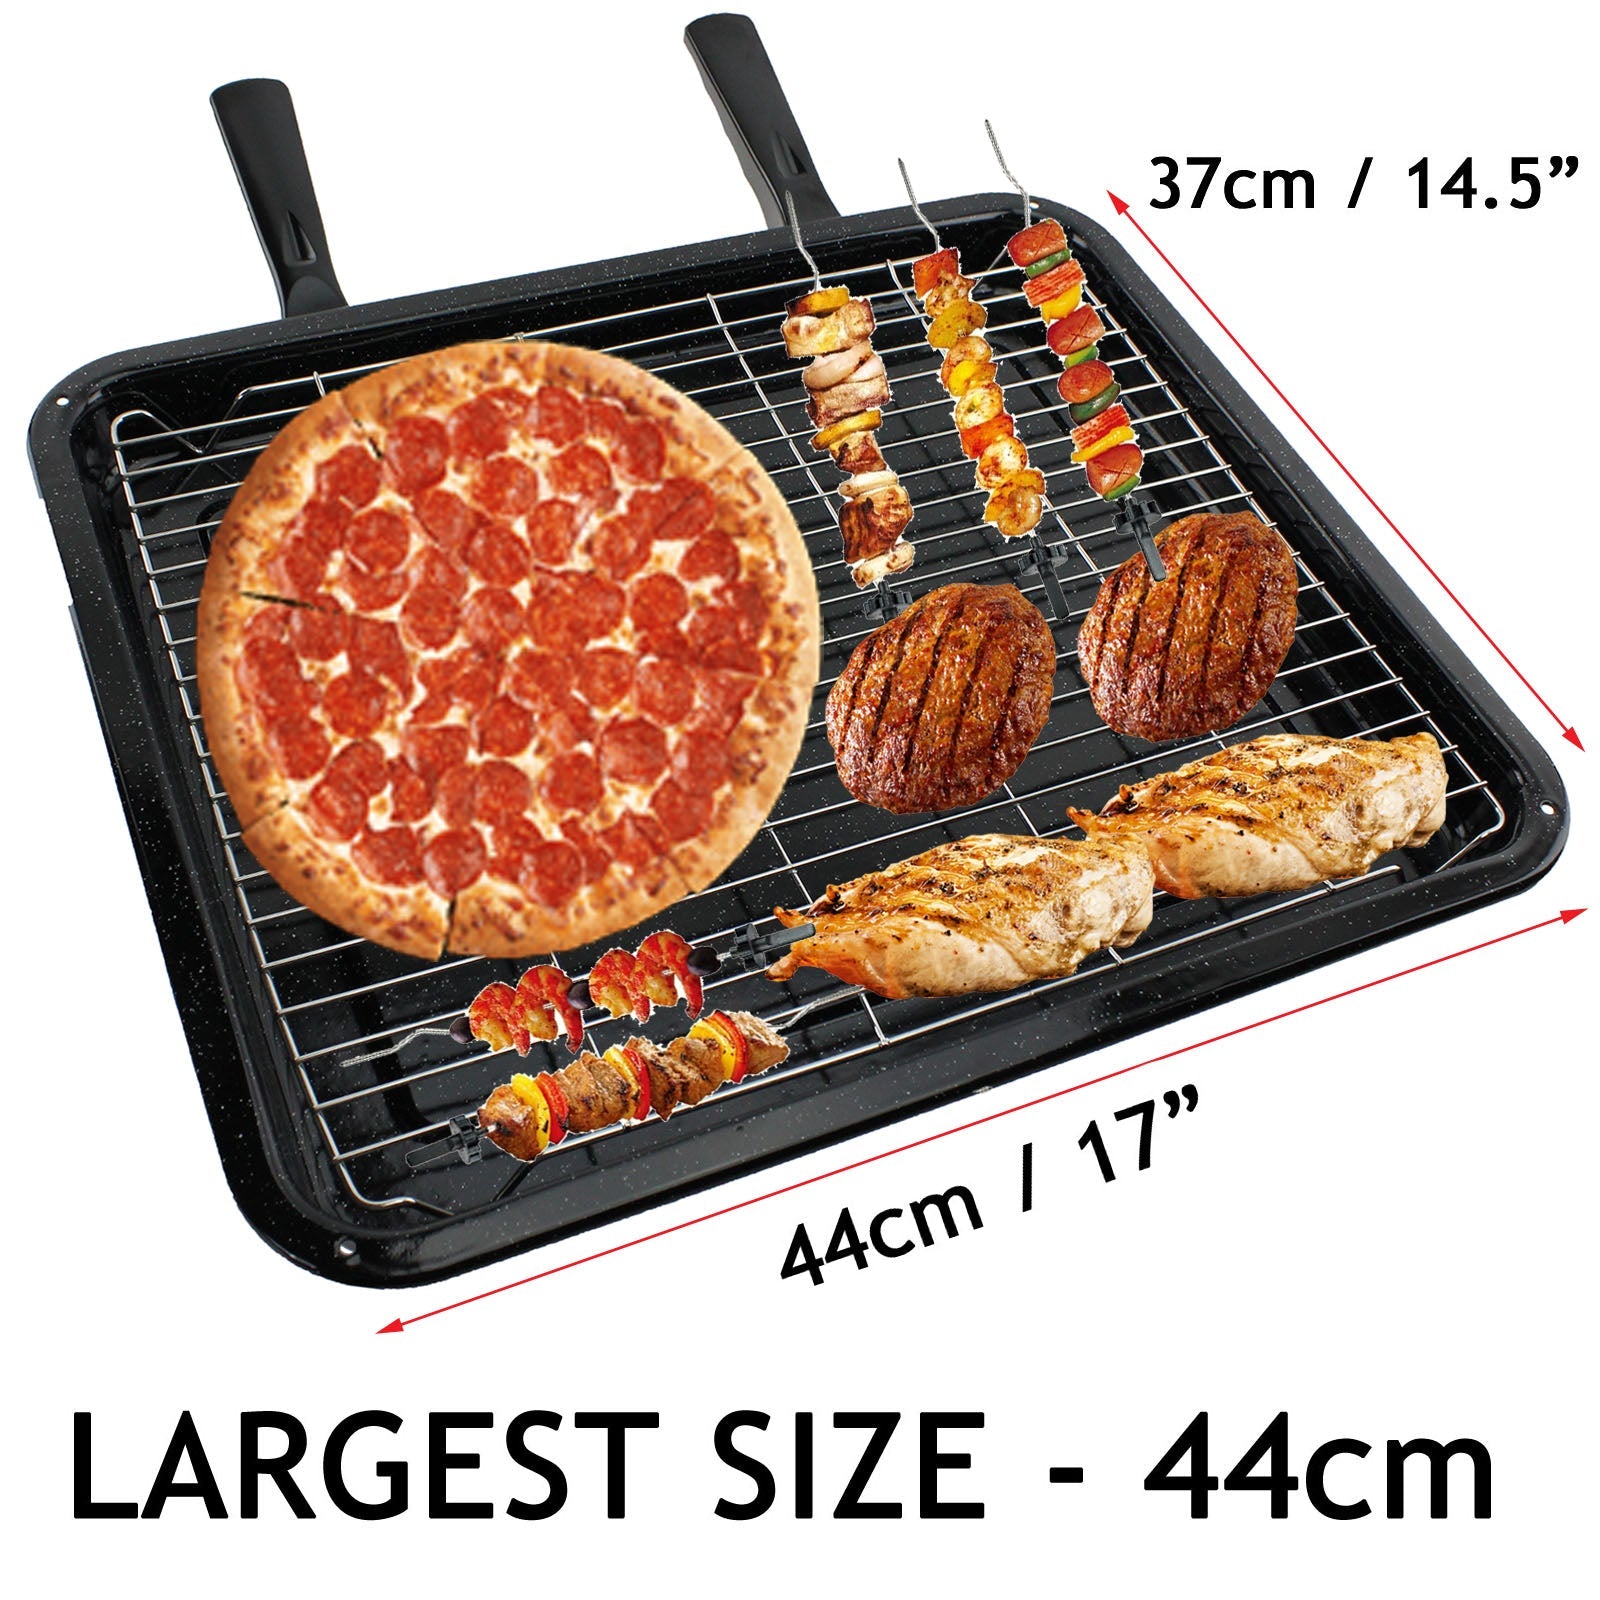 Extra Large Grill Pan for NEFF Oven / Cookers (440mm x 370mm)